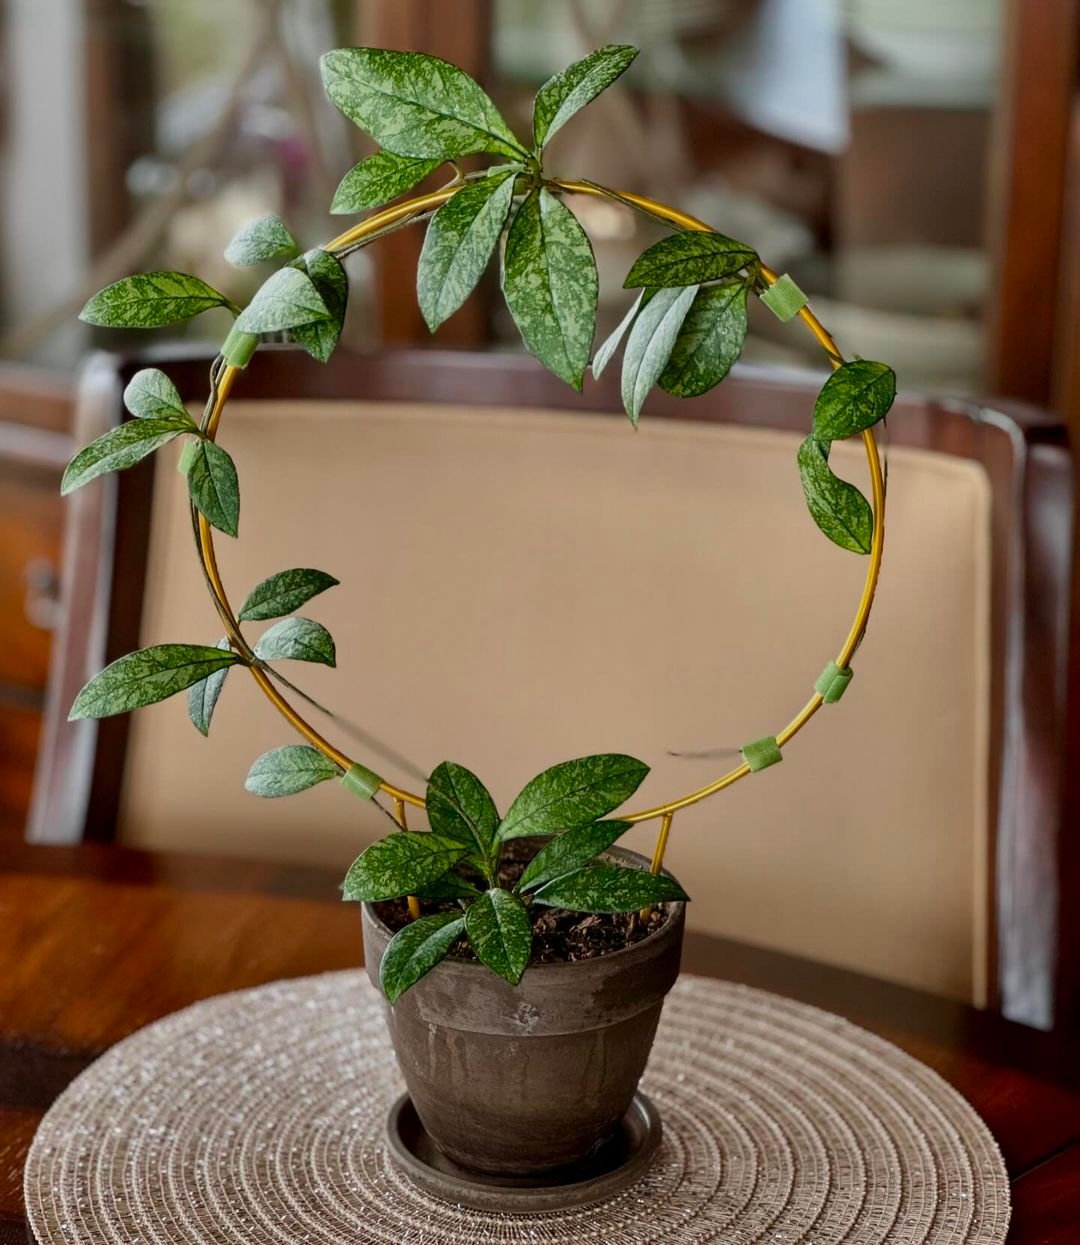 A Hoya plant in a pot on a table with a circular wire around it.